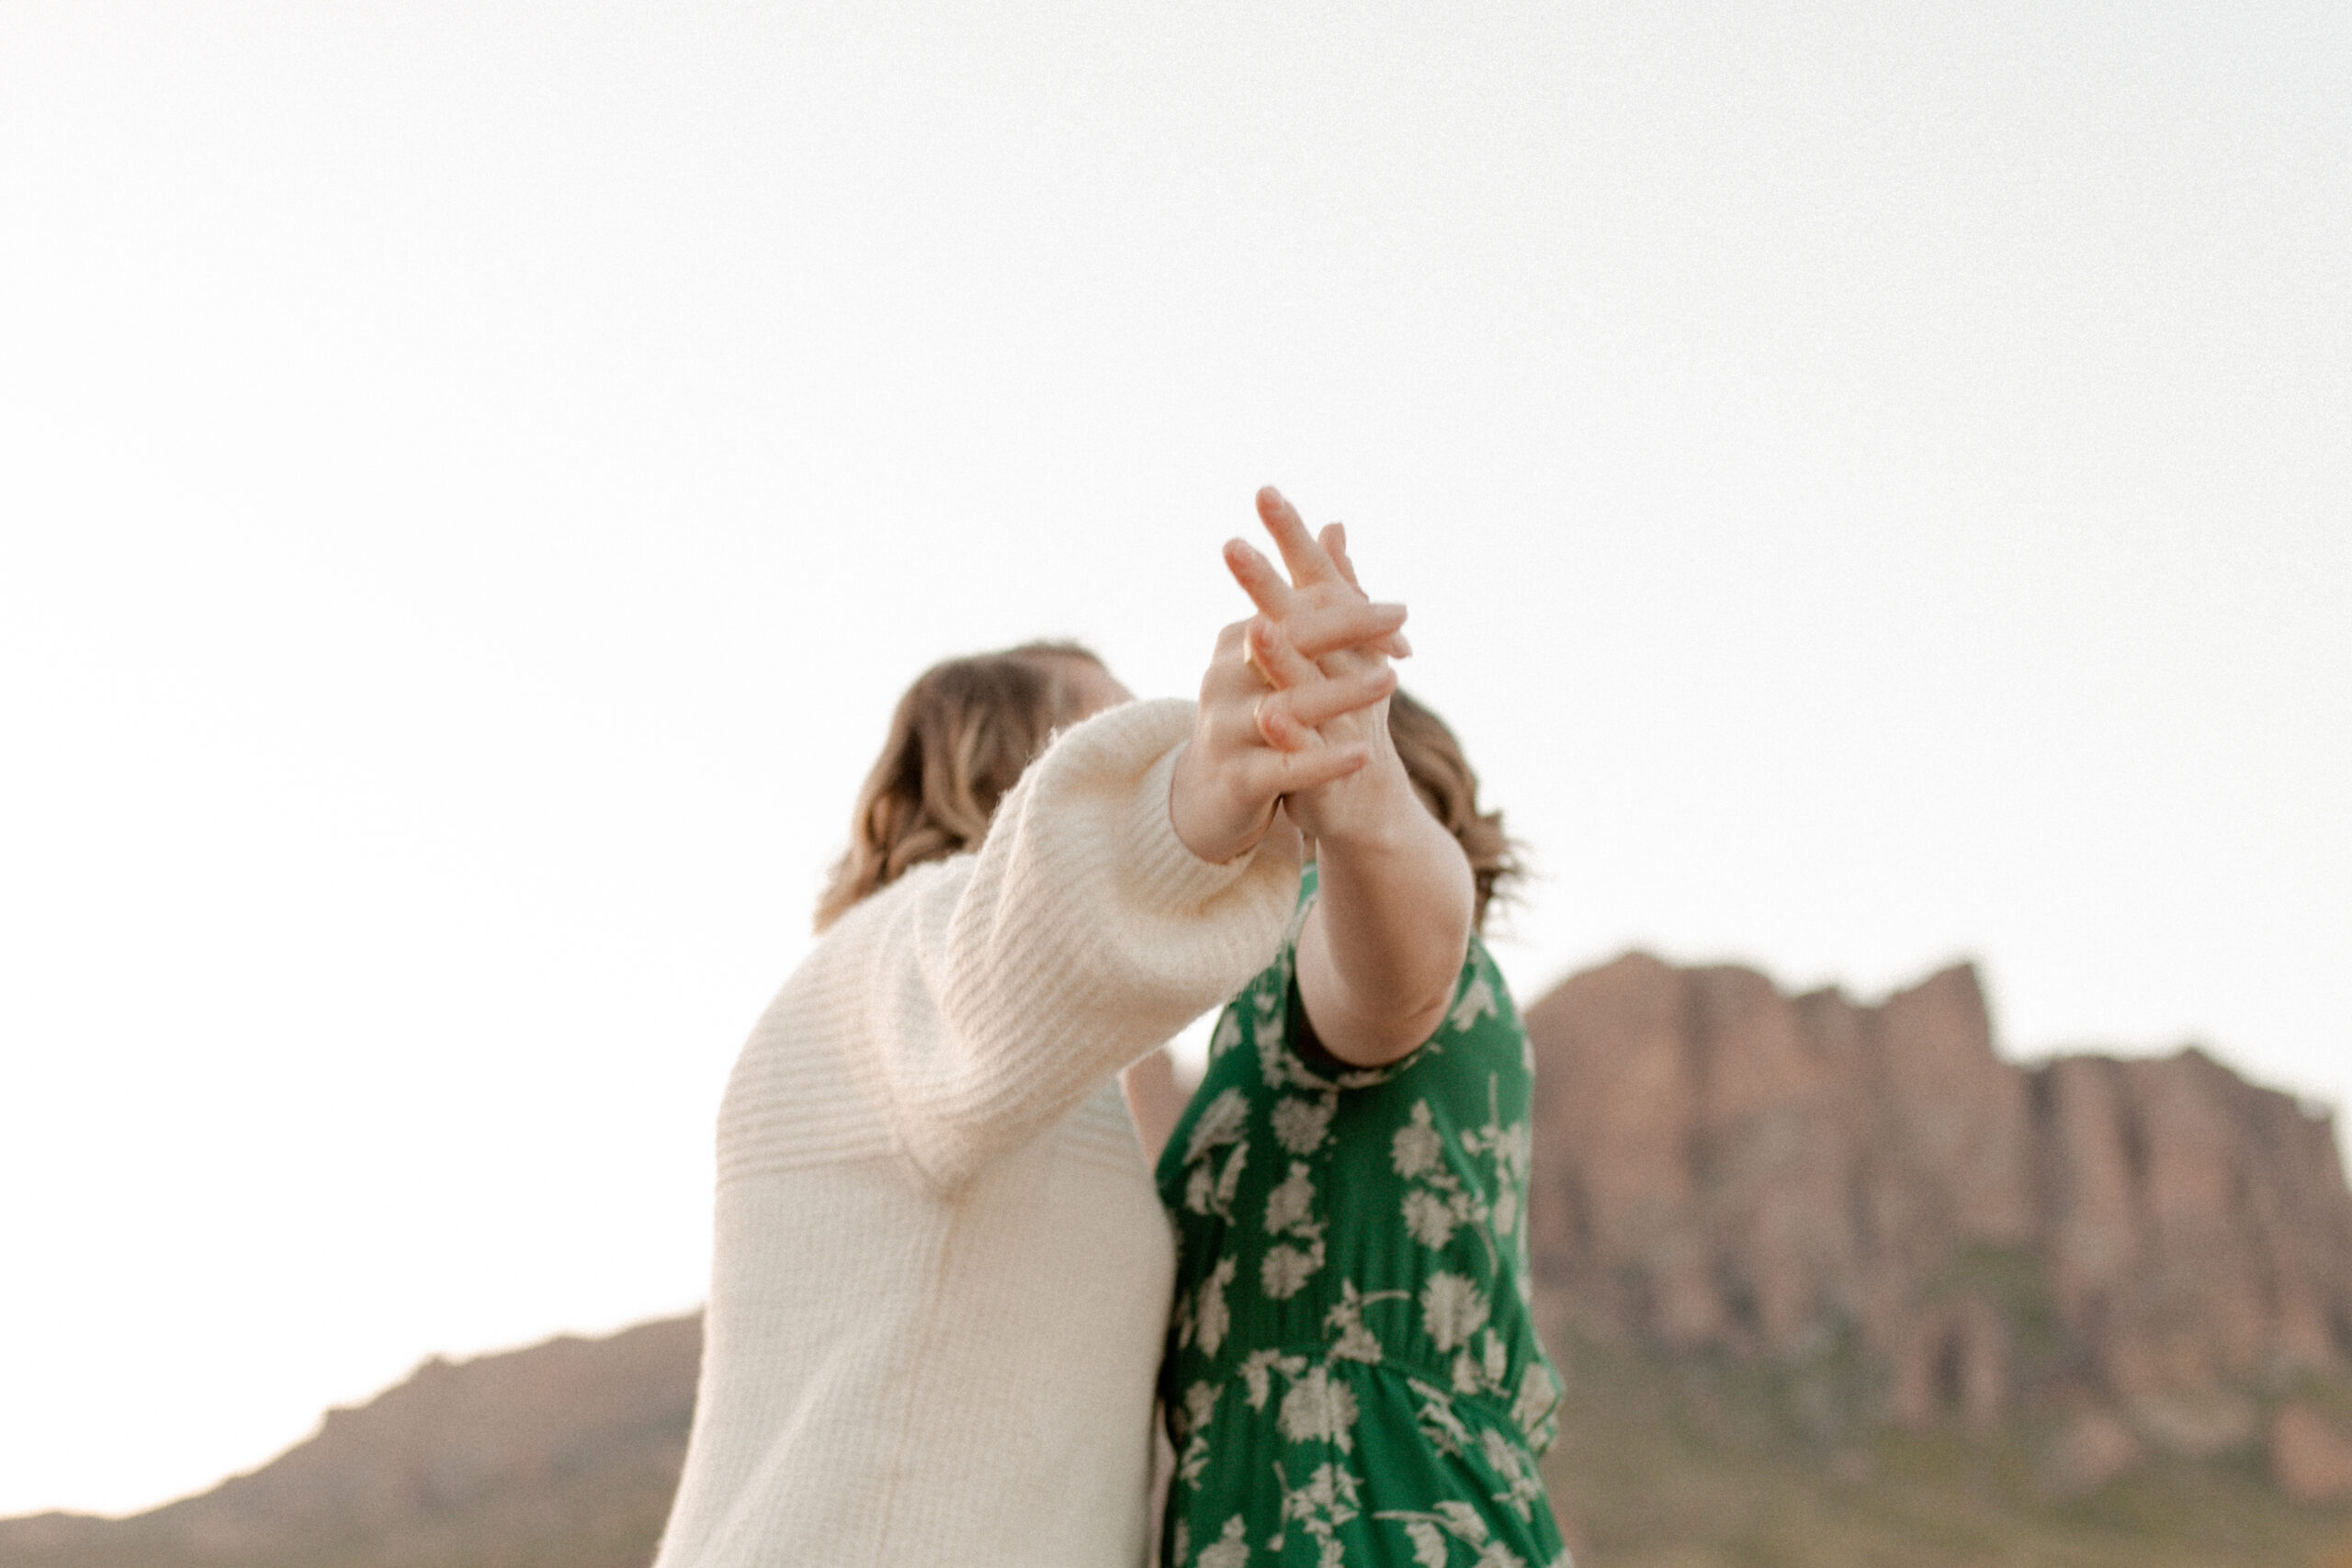 Two women pose in the superstition mountains for a documentary style engagement session